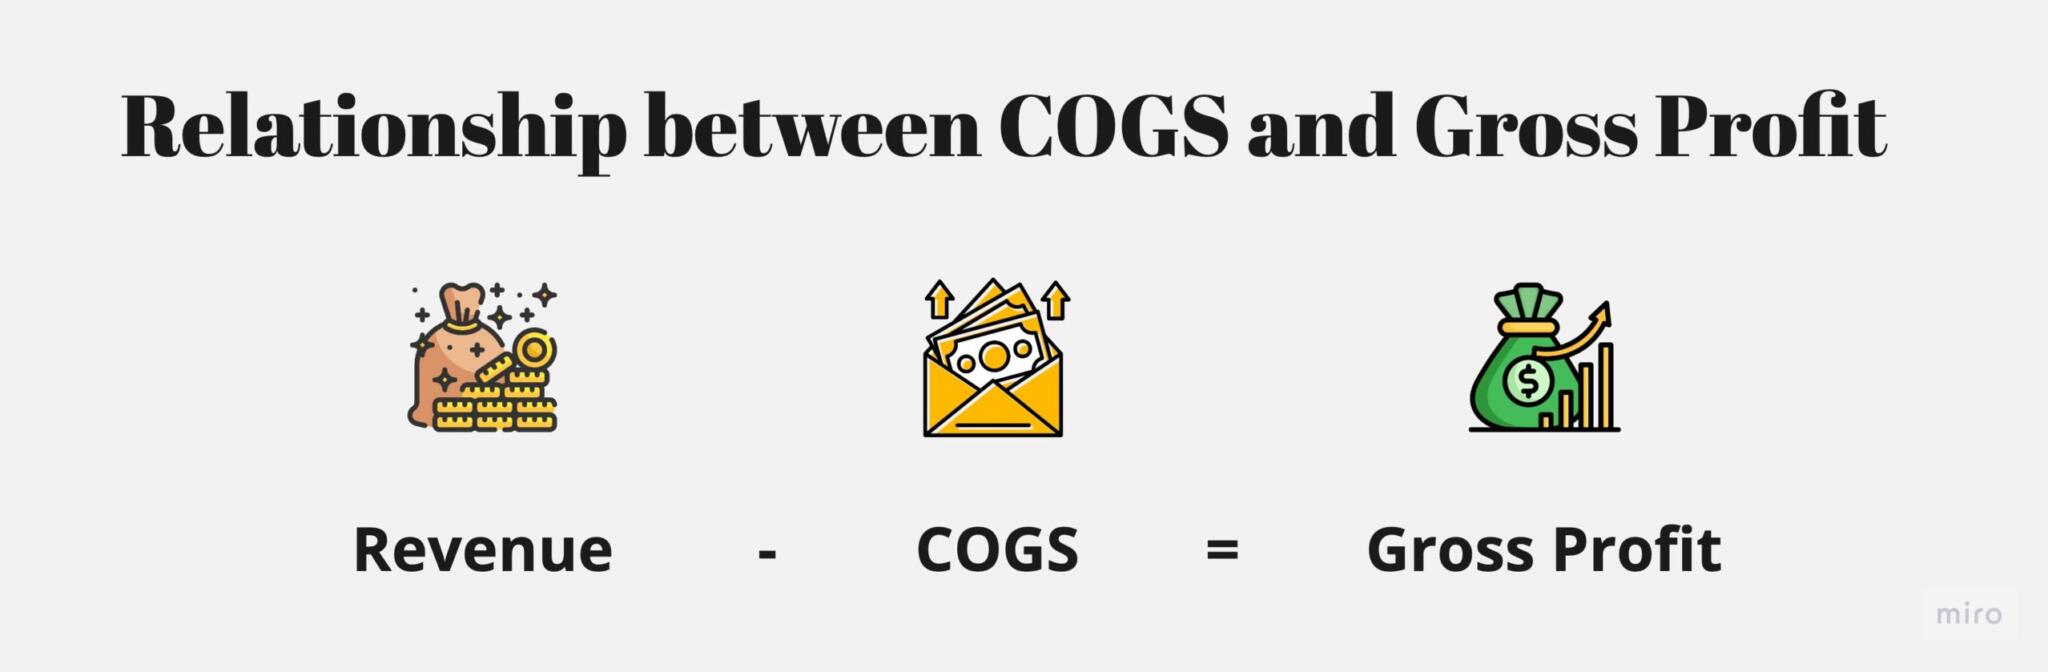 cogs meaning in accounting